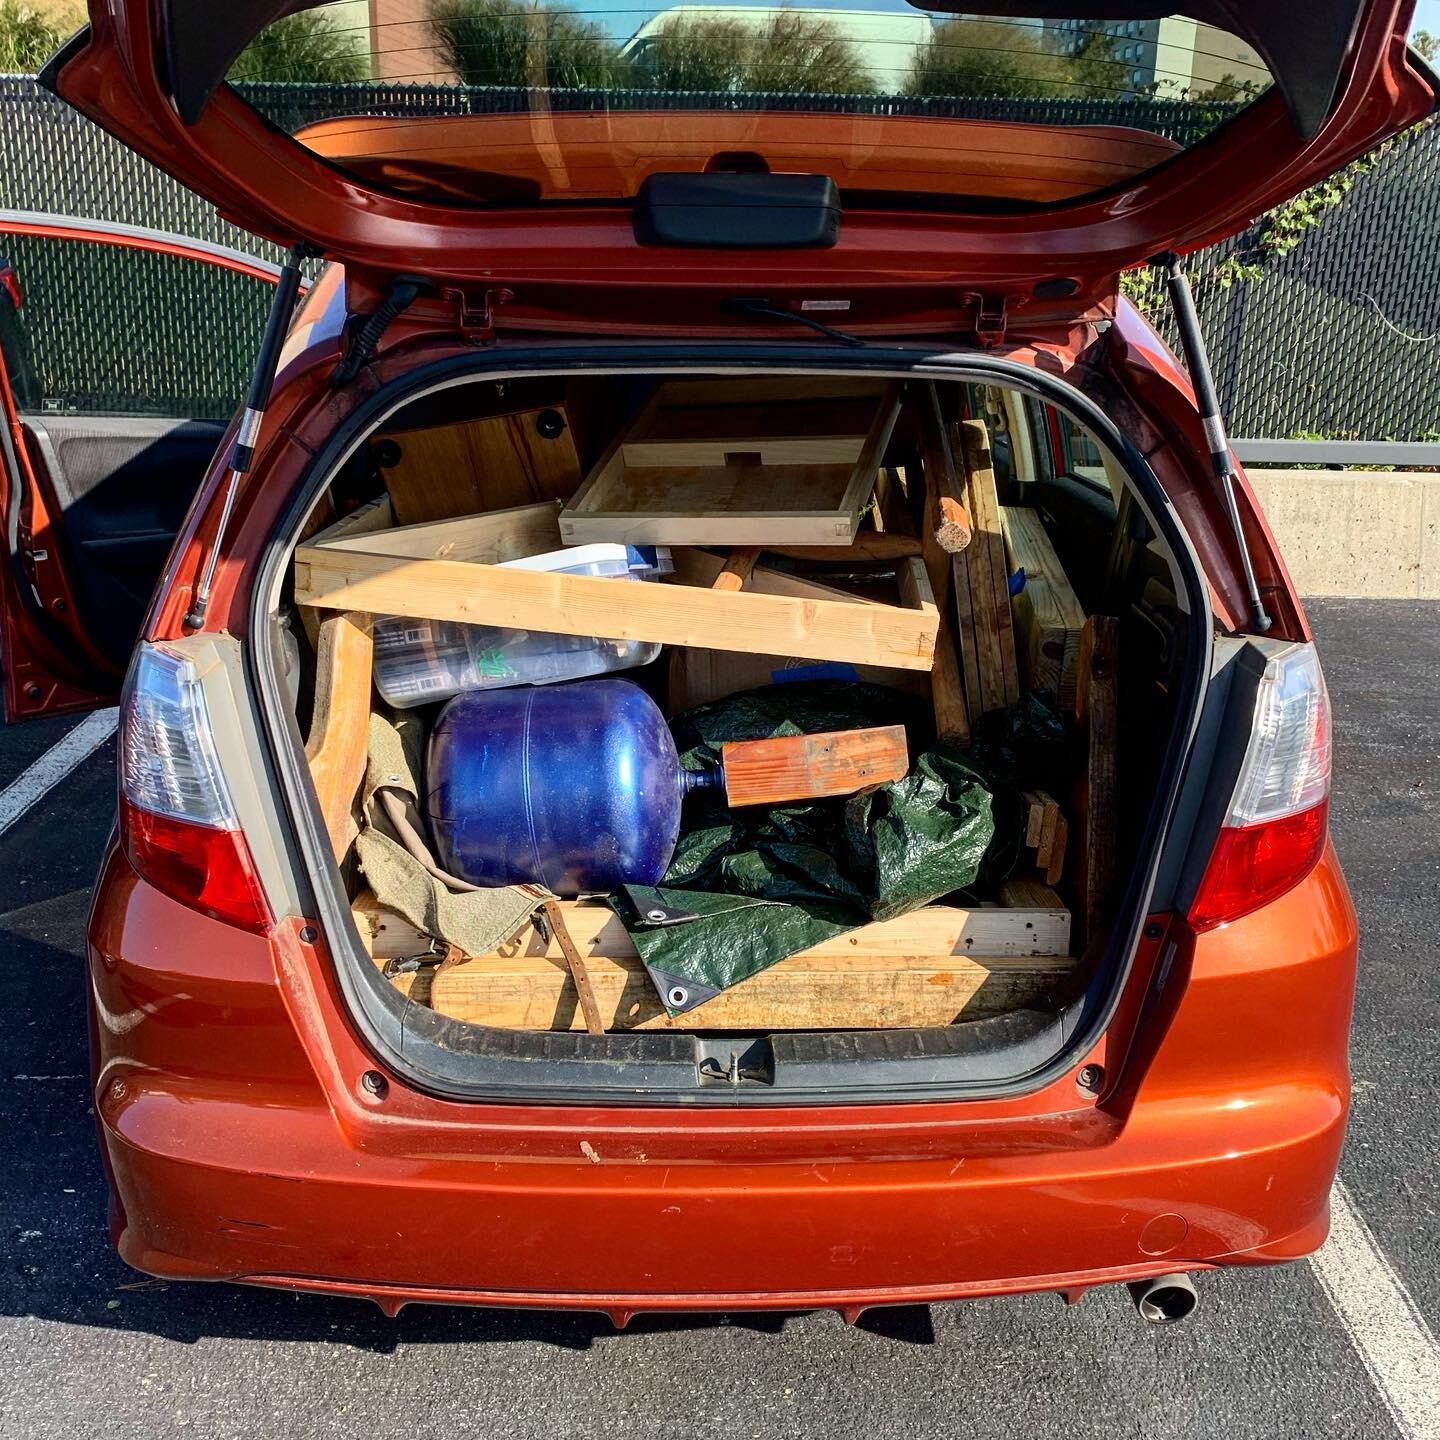 Attempting to fit an entire wood shop in a hatchback. 

#woodworking #montessori #kidswoodworking #handtools#waldorf #hatchback